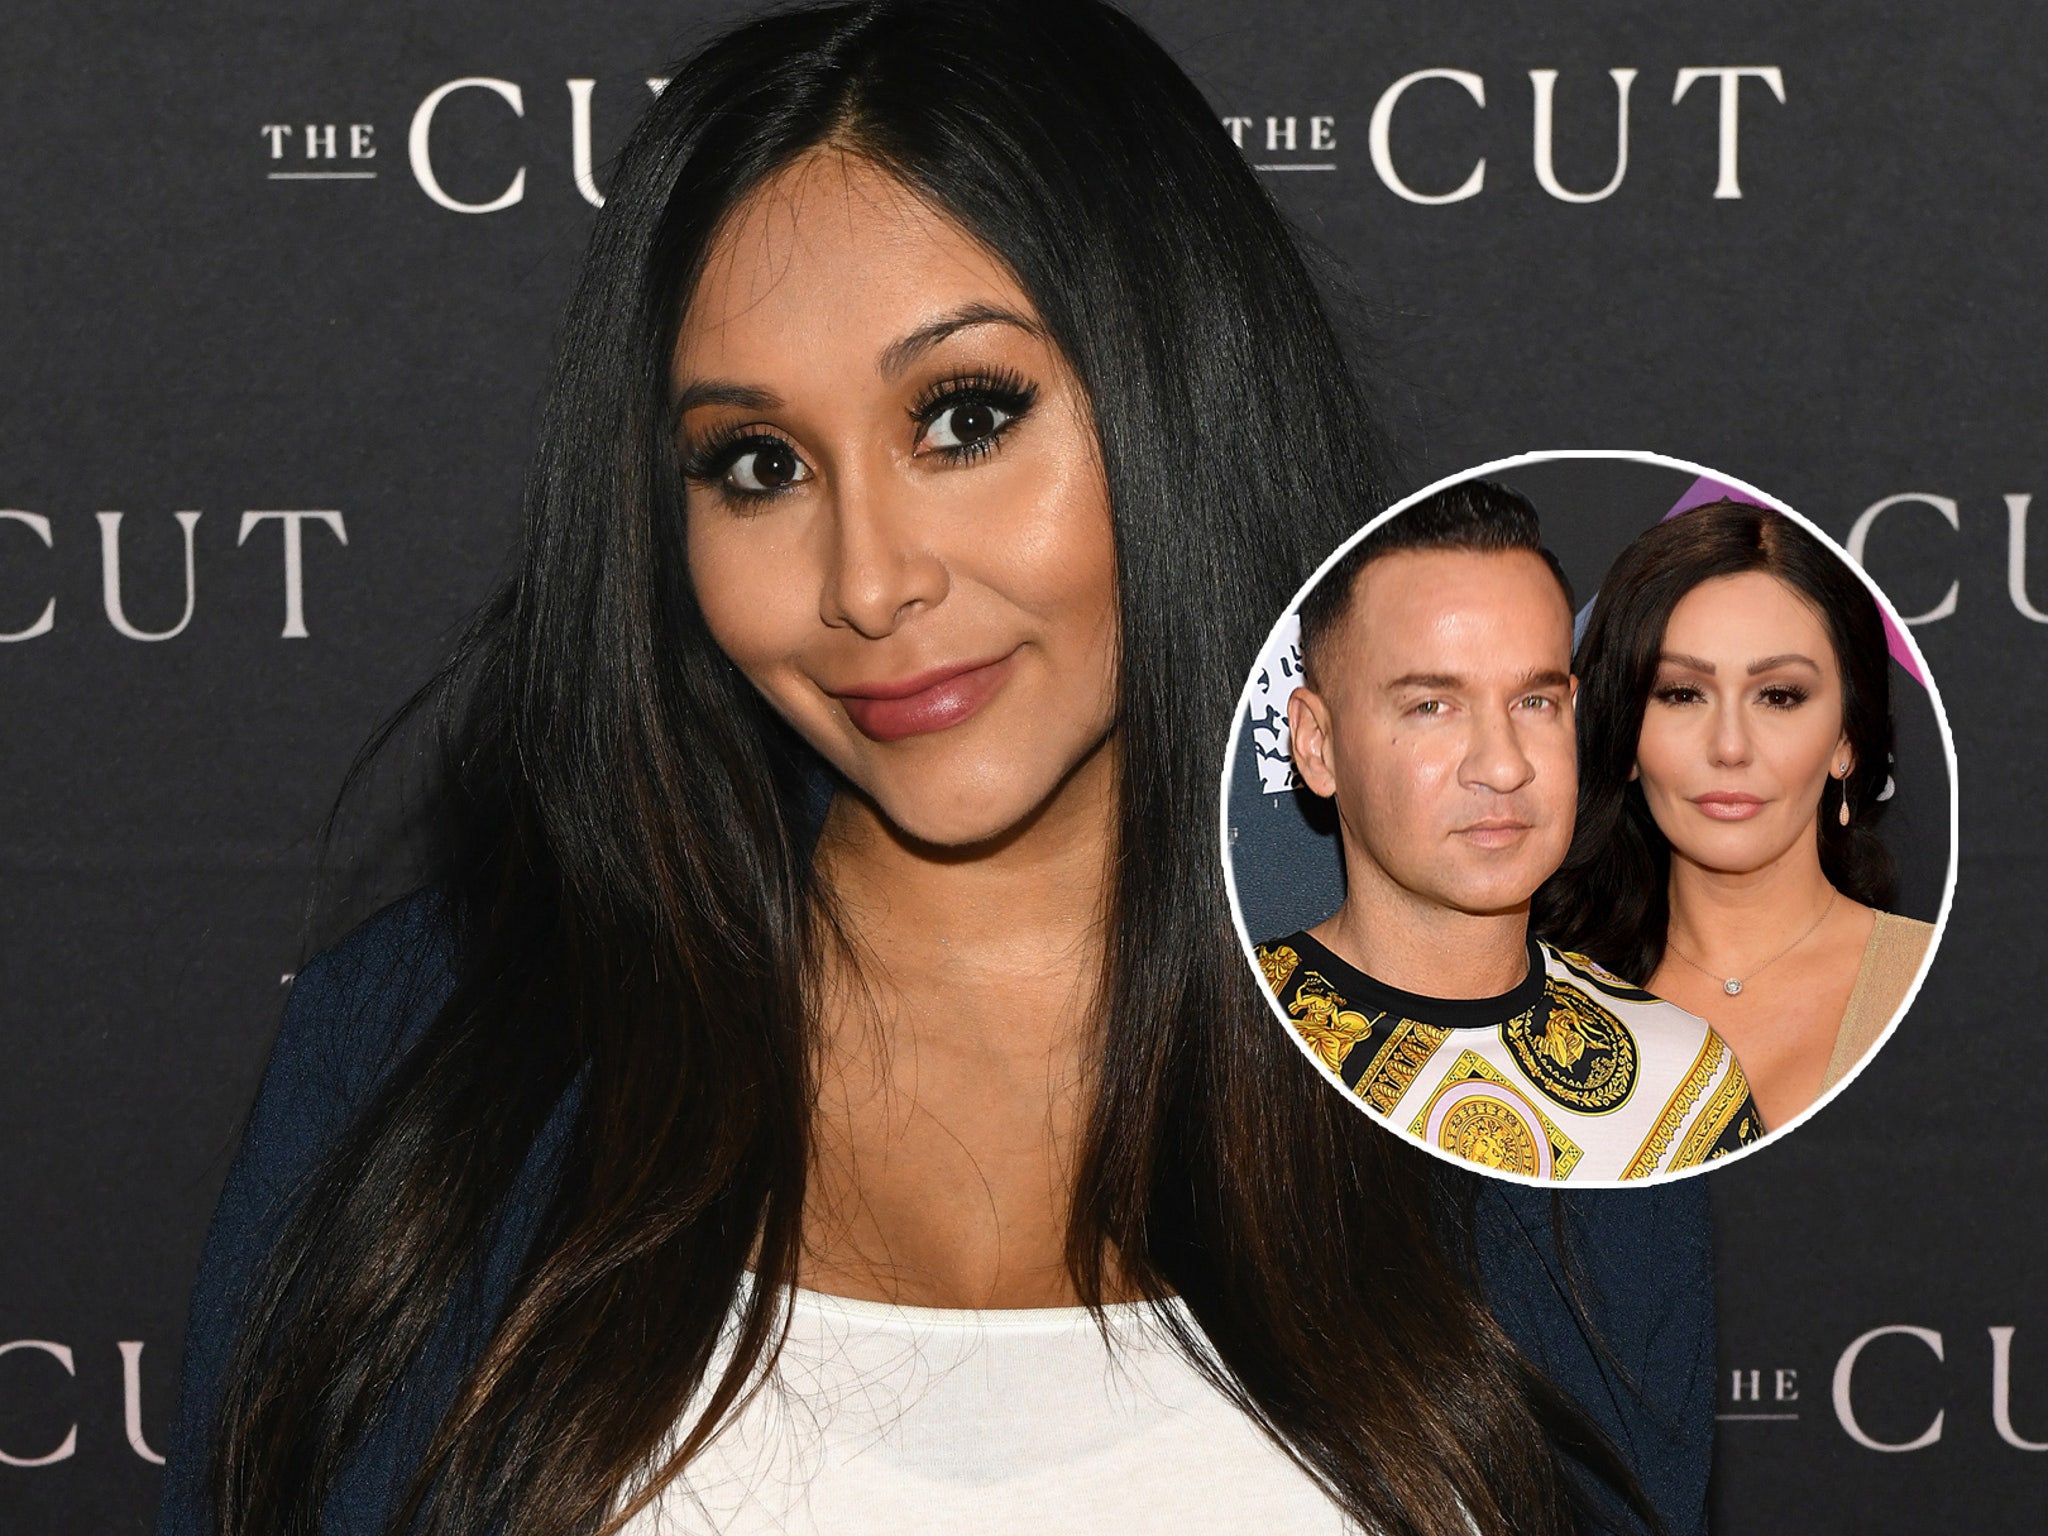 Snooki and JWoww Agree to Kill the Supreme Court if Justices Fail